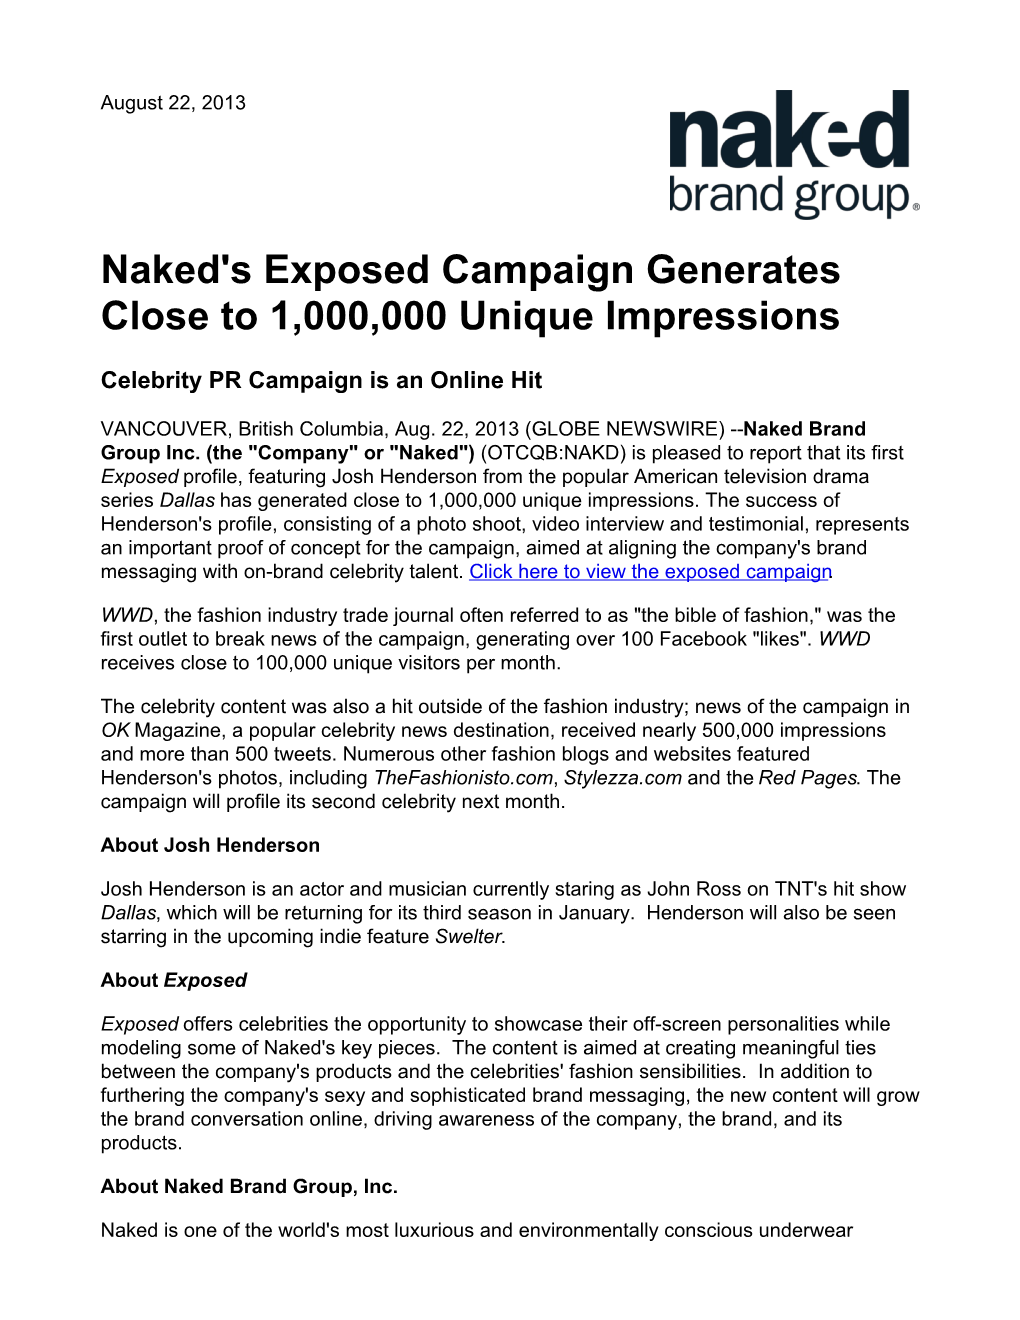 Naked's Exposed Campaign Generates Close to 1,000,000 Unique Impressions